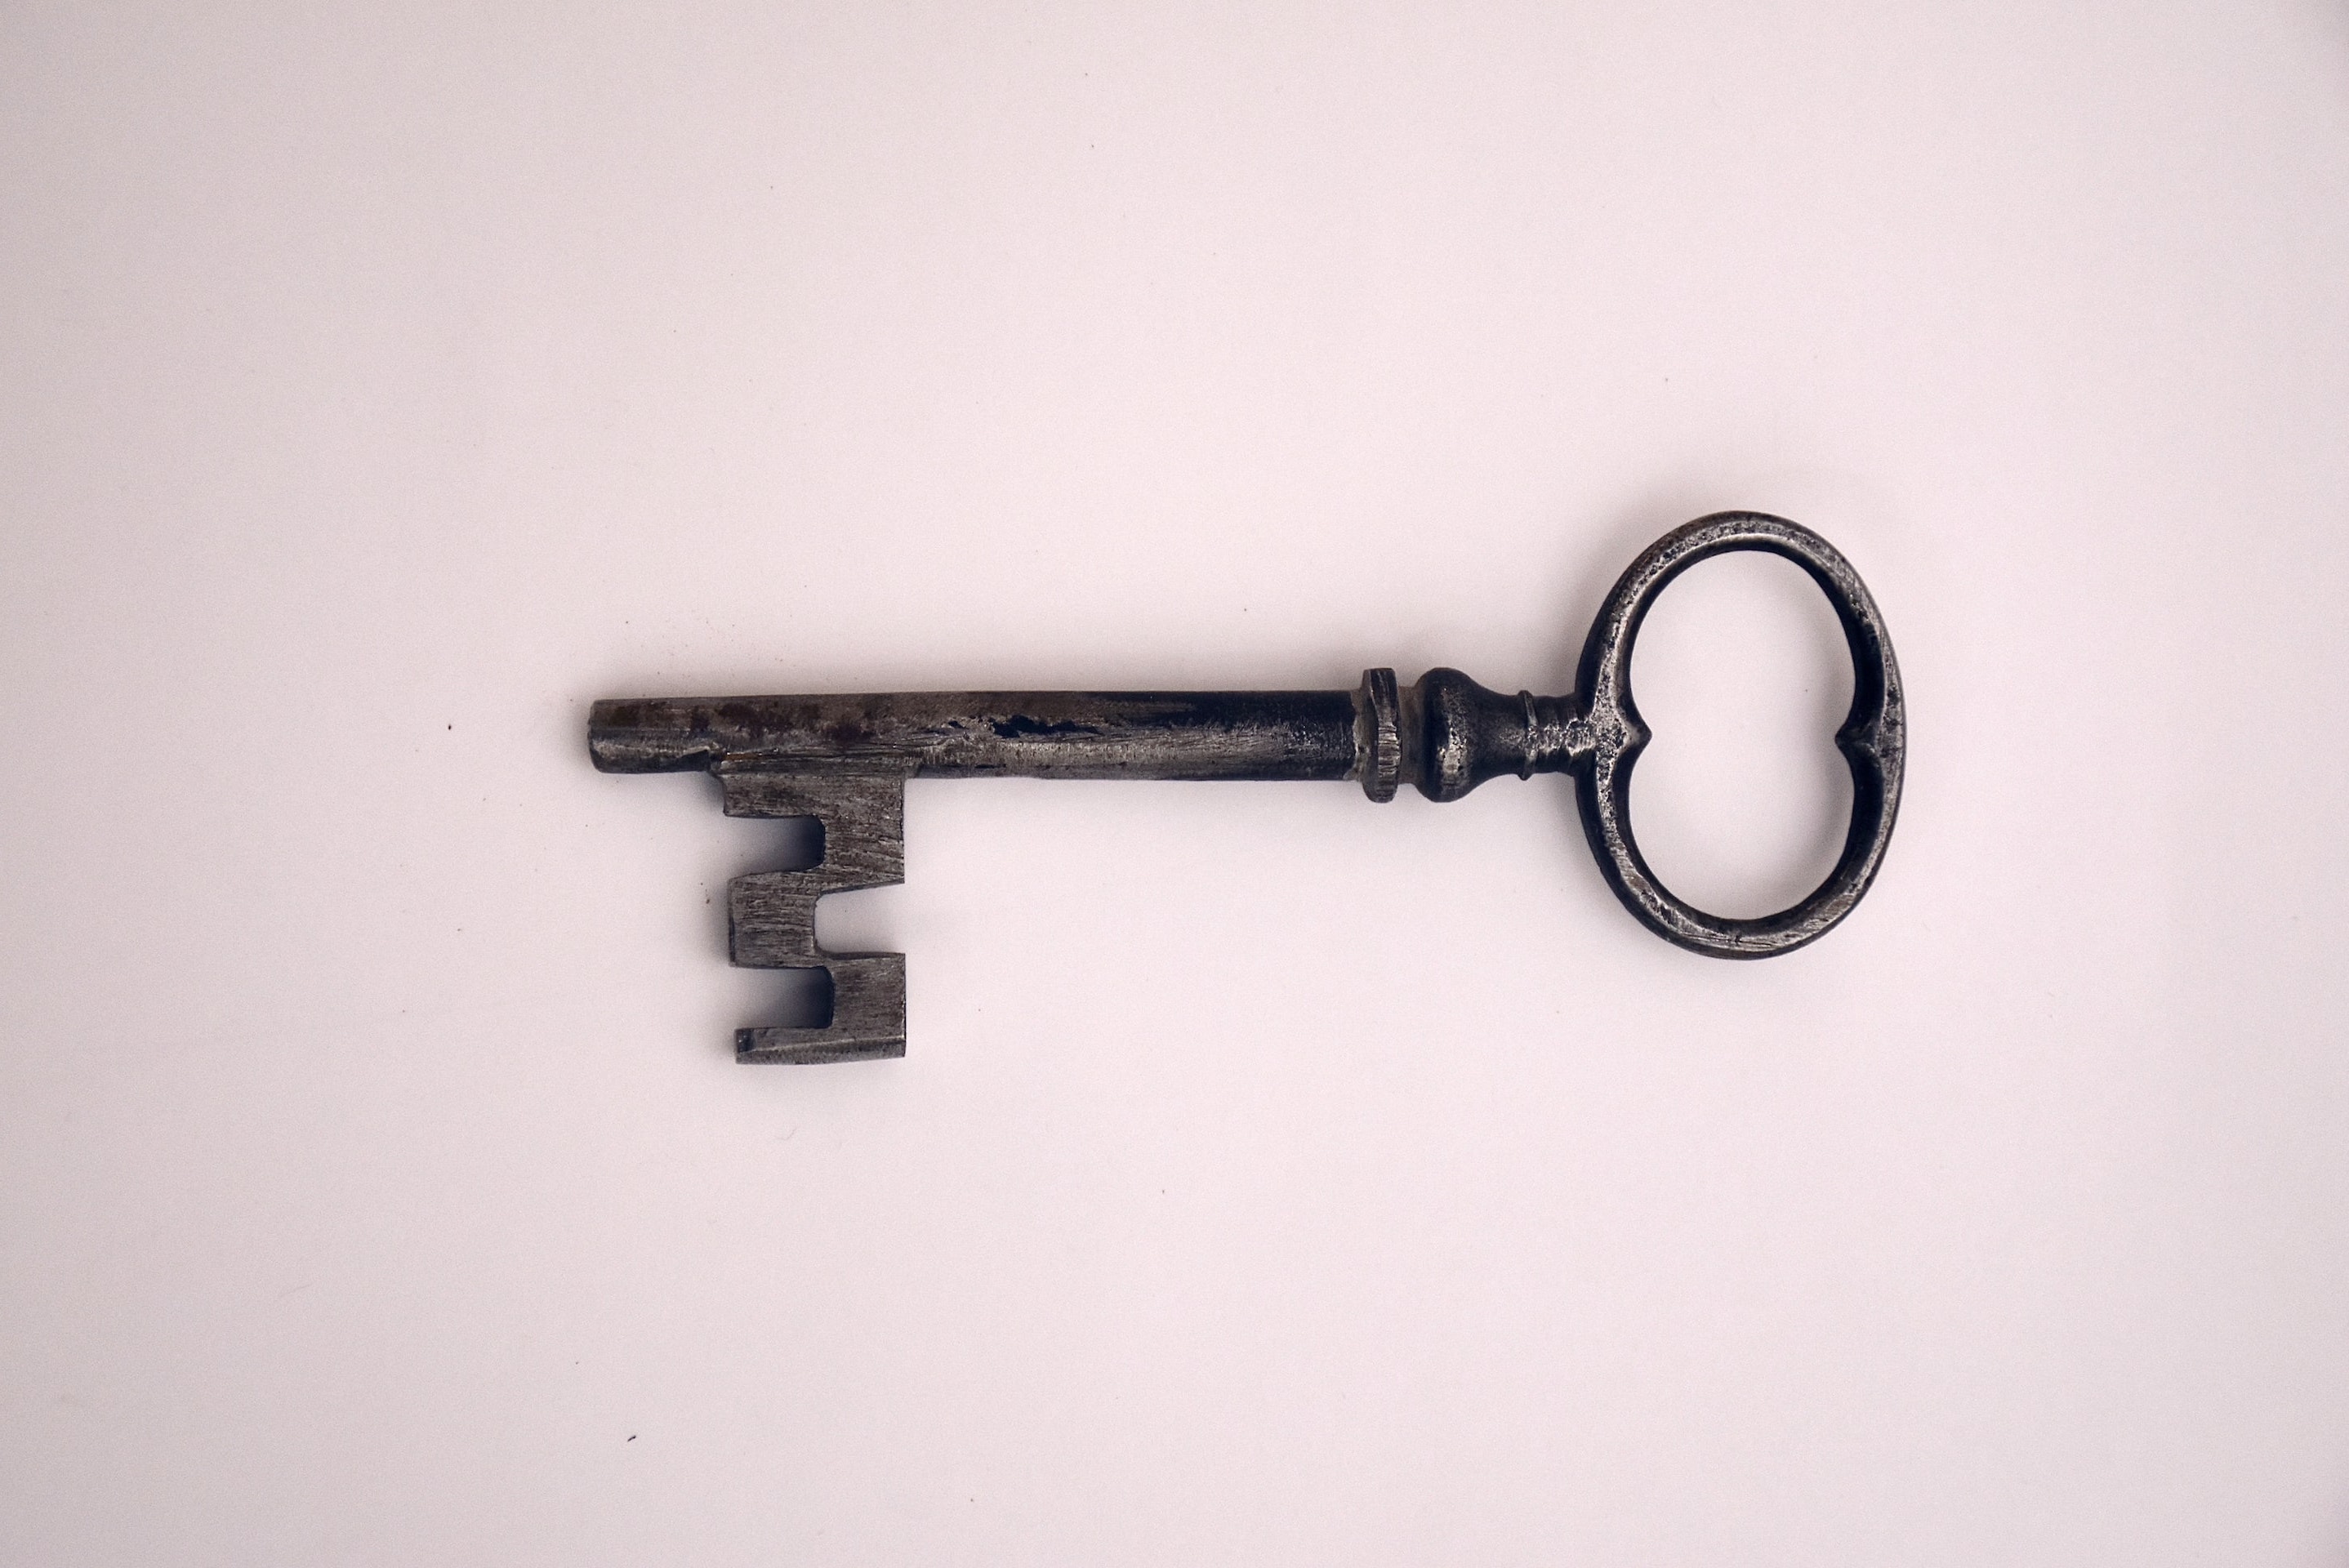 An old fashioned metal key